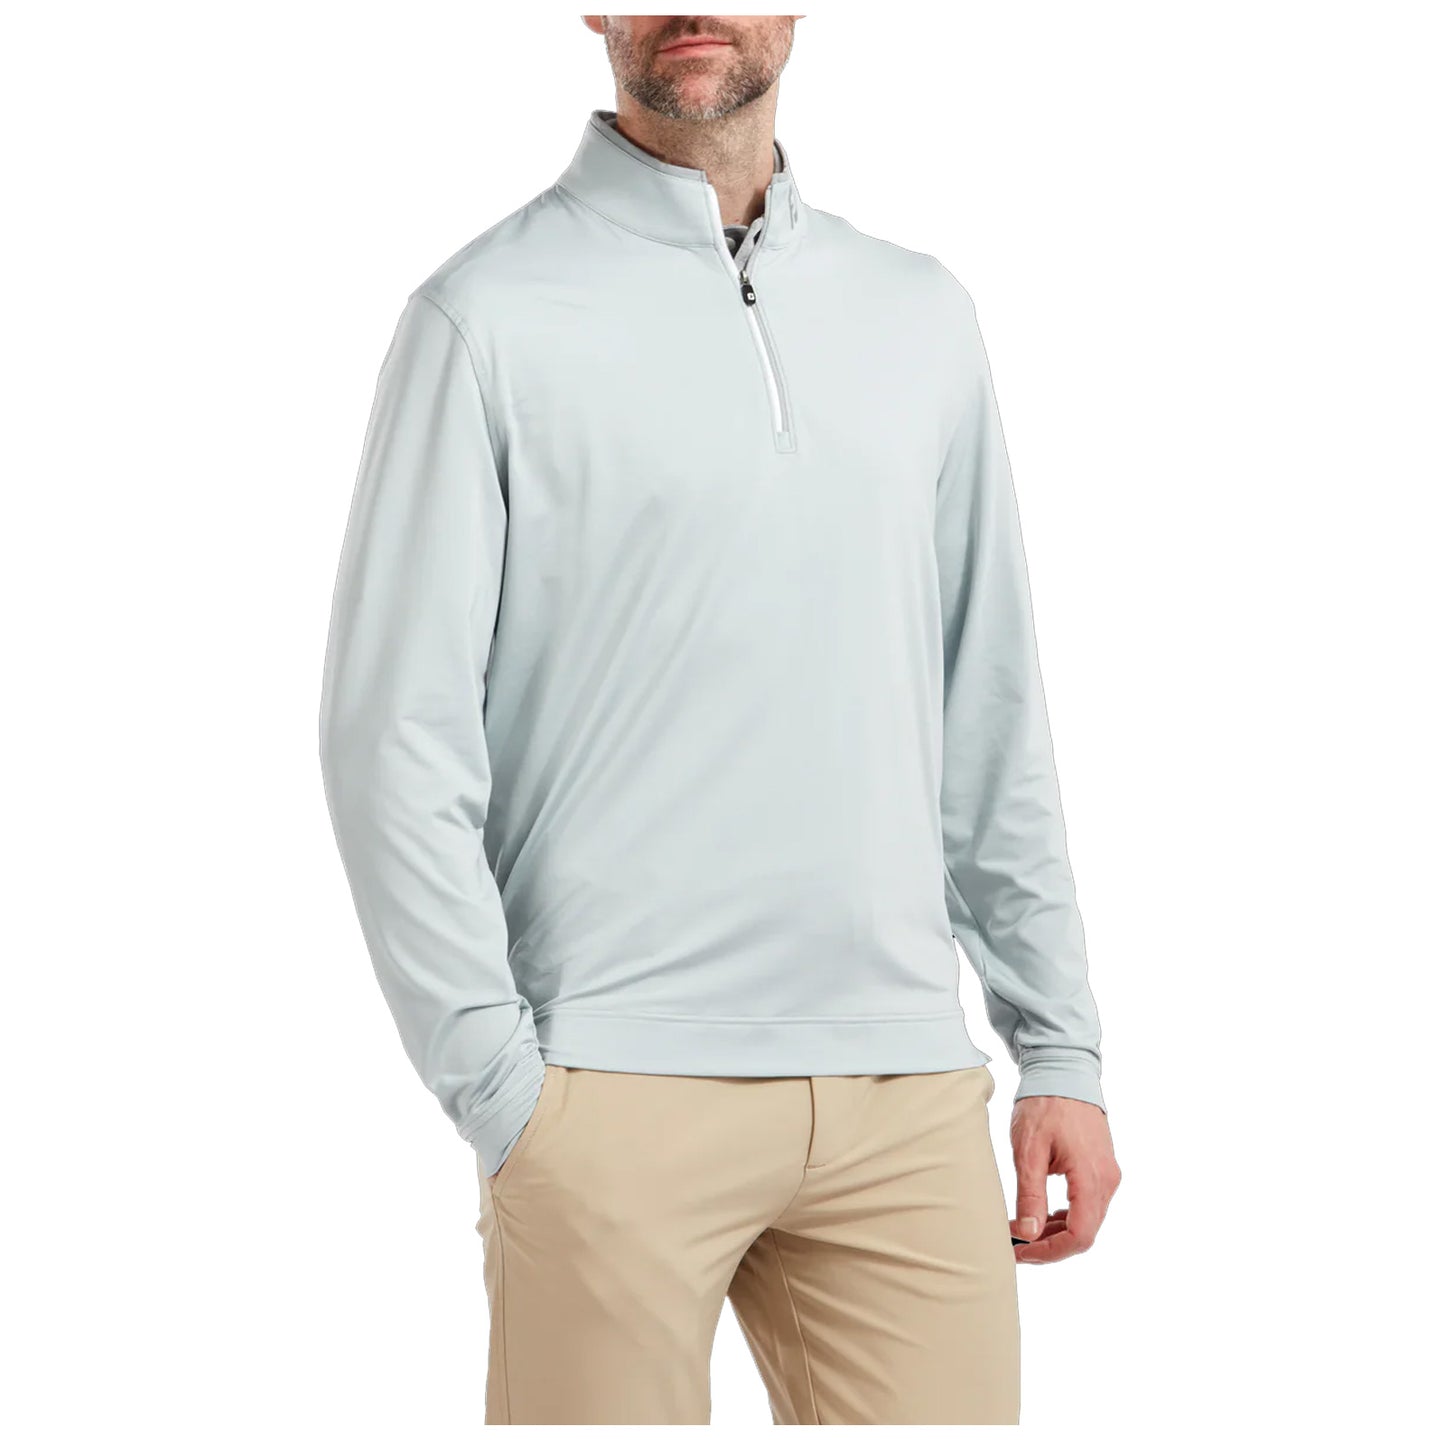 FootJoy Mens Lightweight Microstripe Chill-Out Half Zip Top